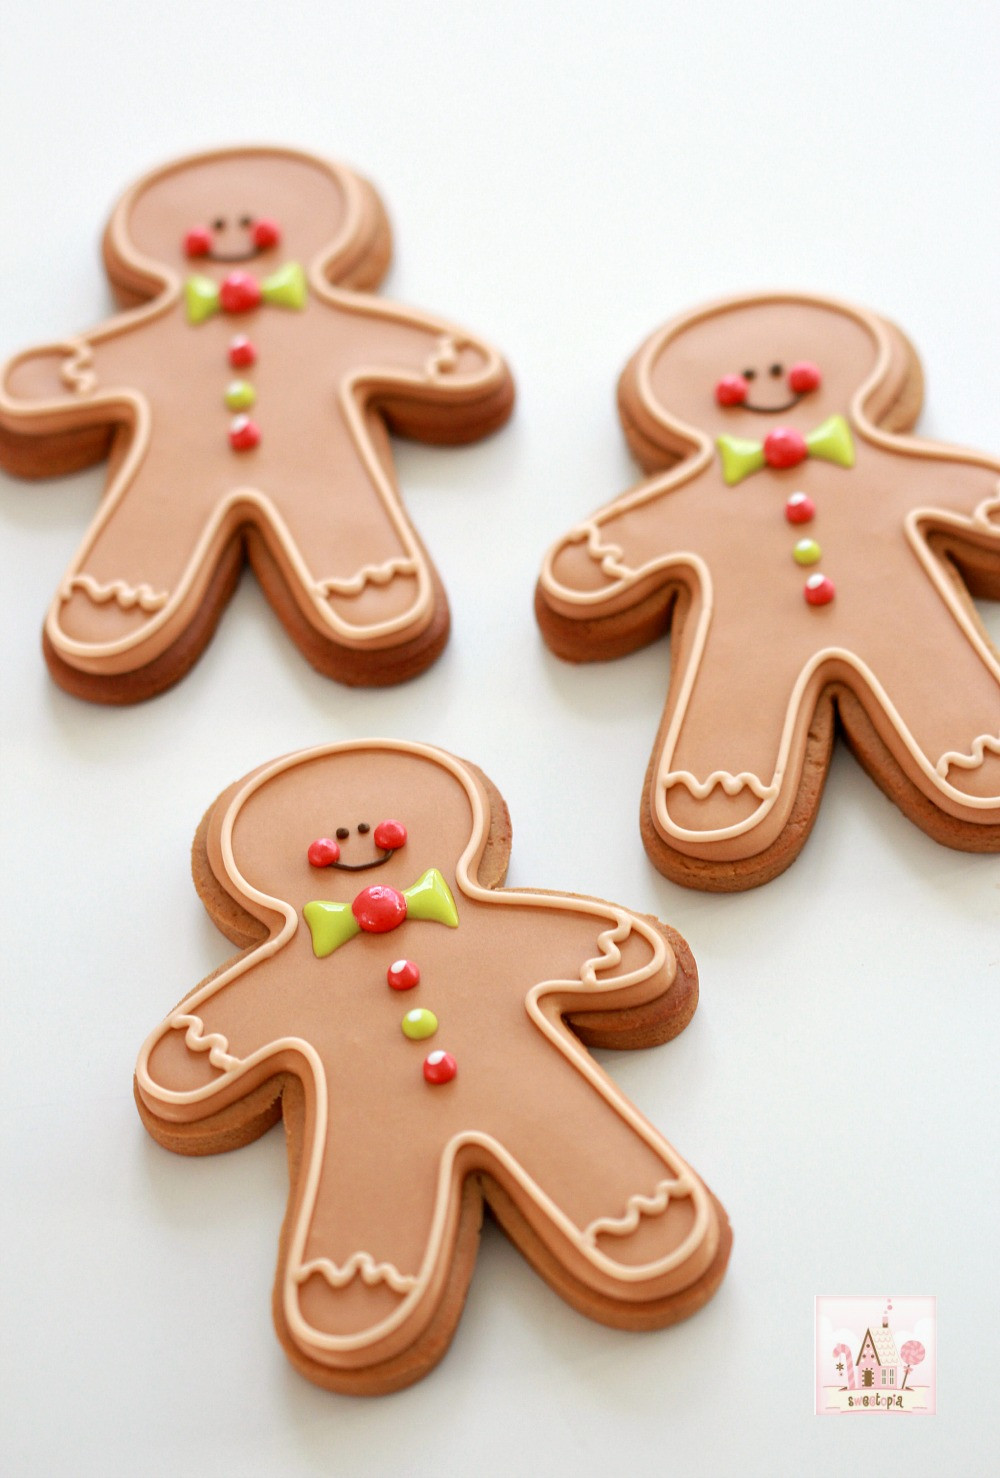 Gingerbread Man Cookies
 Video & Recipe How to Make Gingerbread Cut Out Cookies